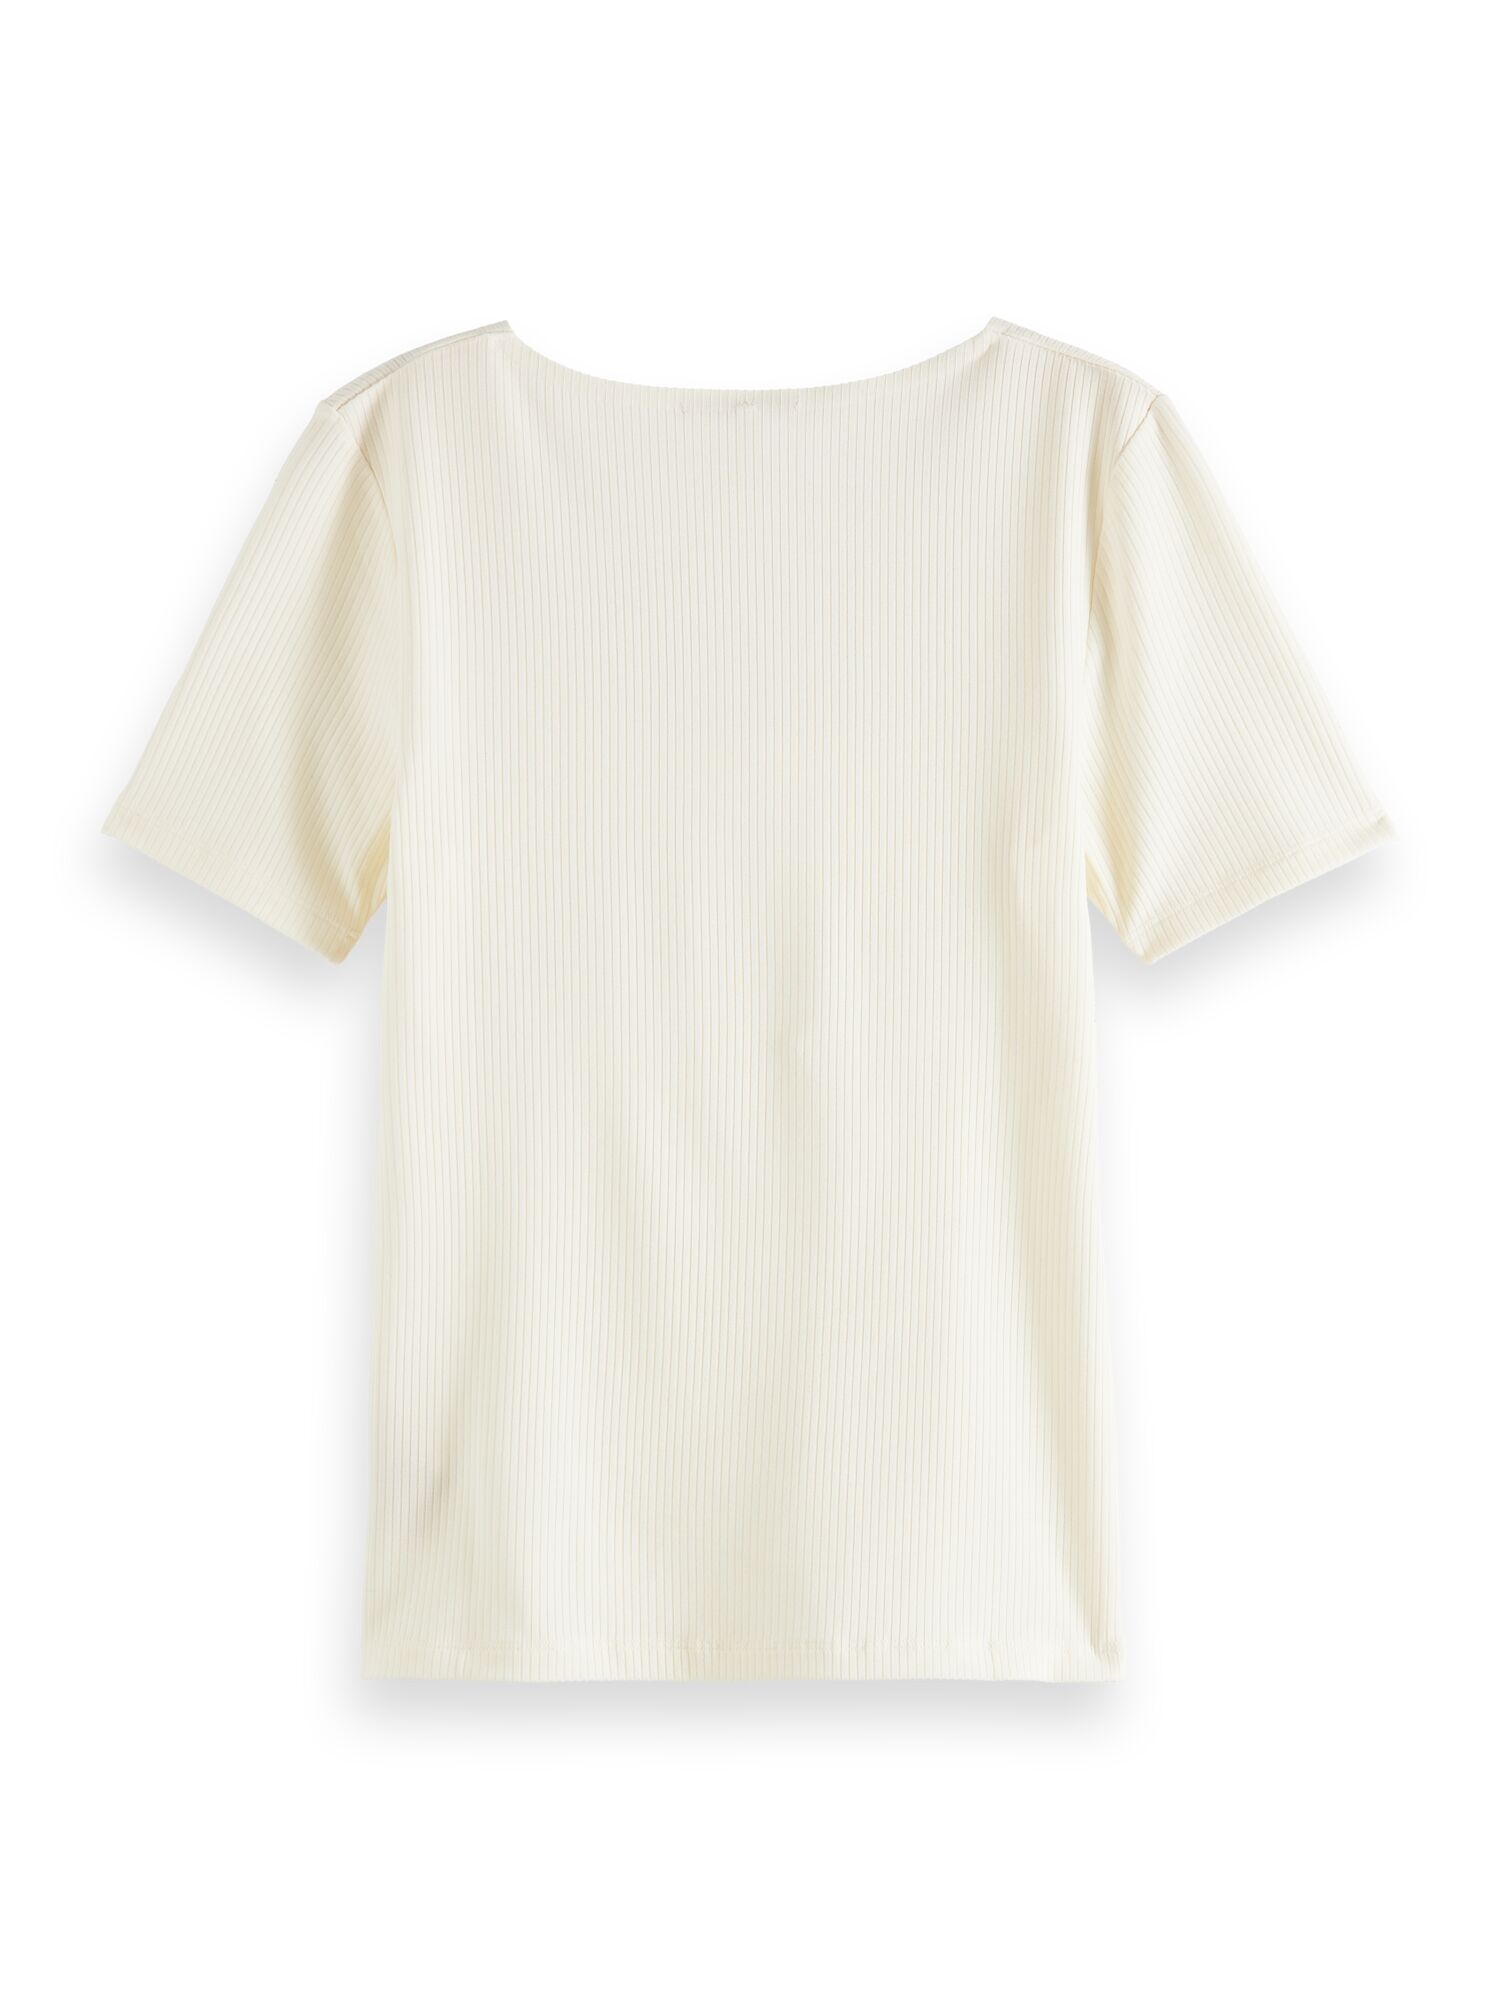 Scotch & Soda | Fitted square neck tee in rib quality 0